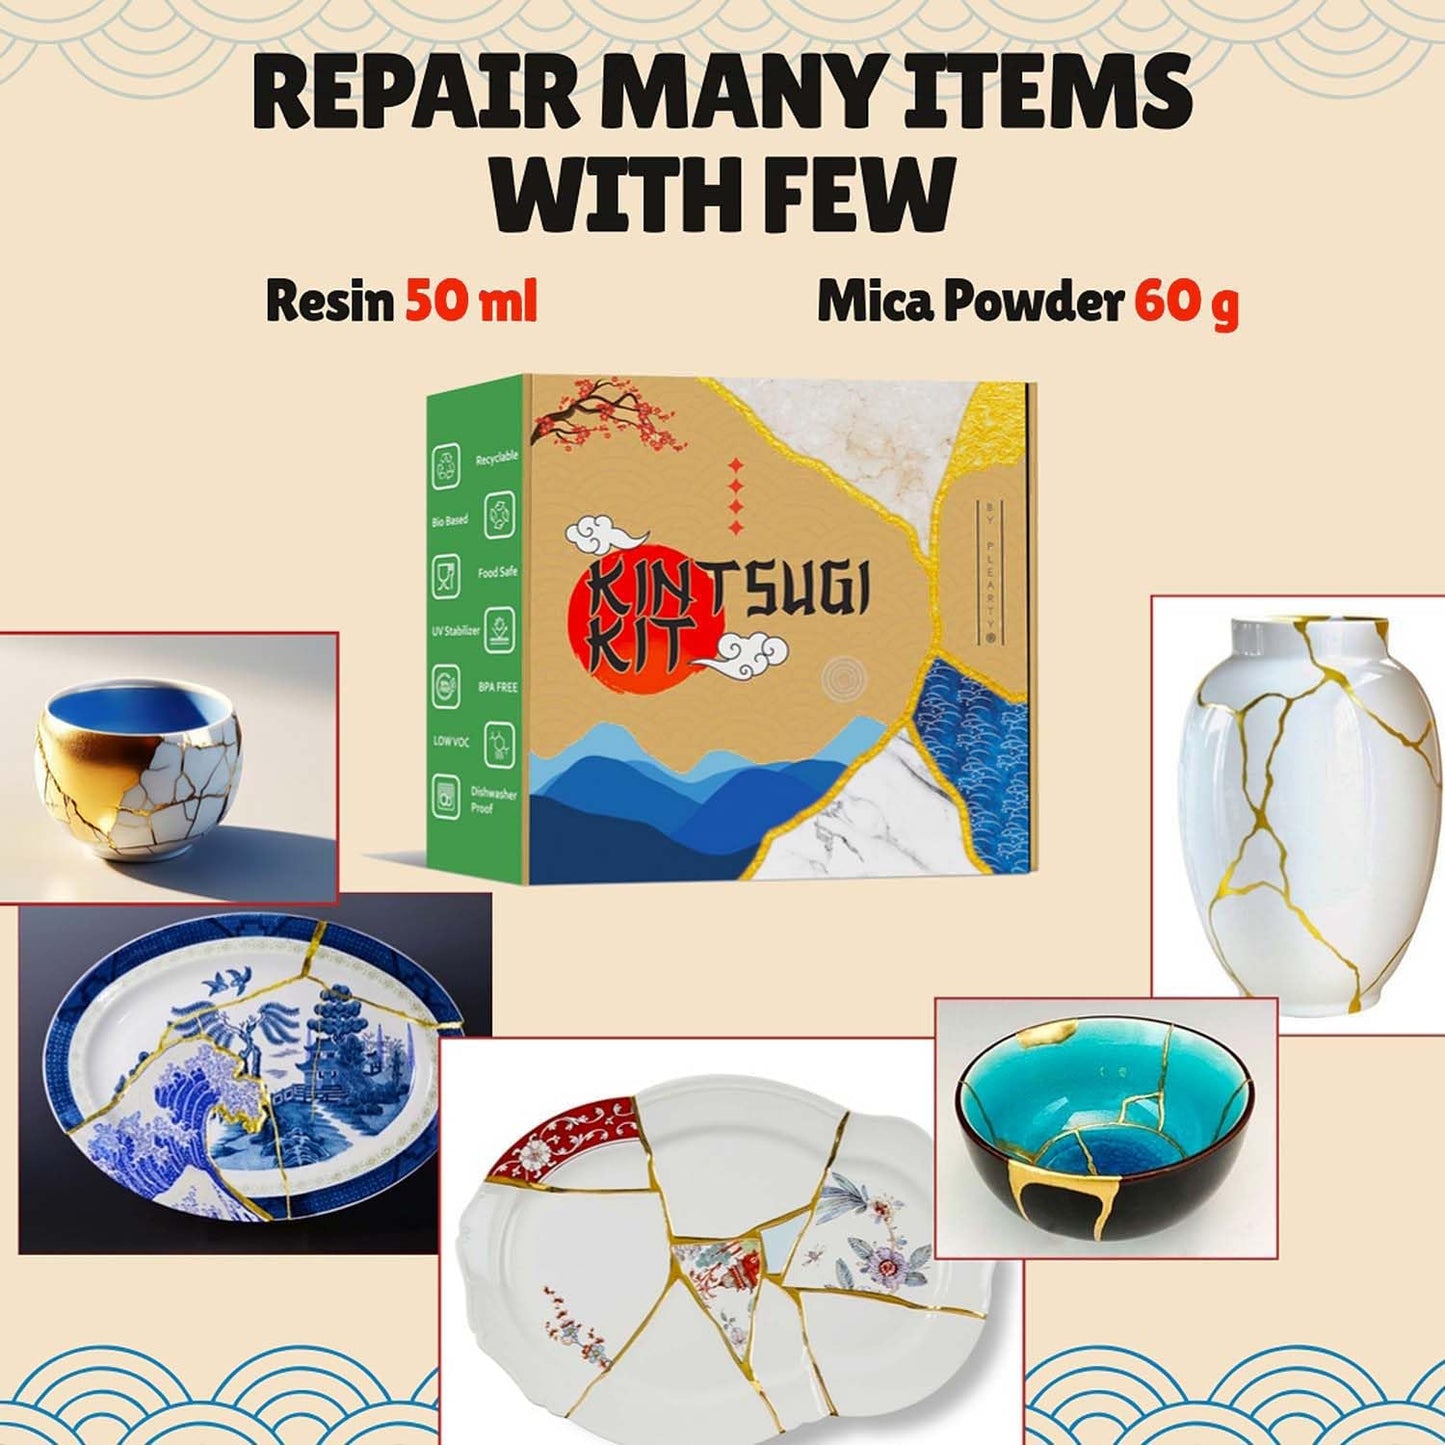 Bio Kintsugi Repair Kit Gold (with 2 Ceramic Cups & Upgraded Resin) with  Complete 15 Pages Booklet, 60g Gold Shades Mica Powder 50ml Resin DIY